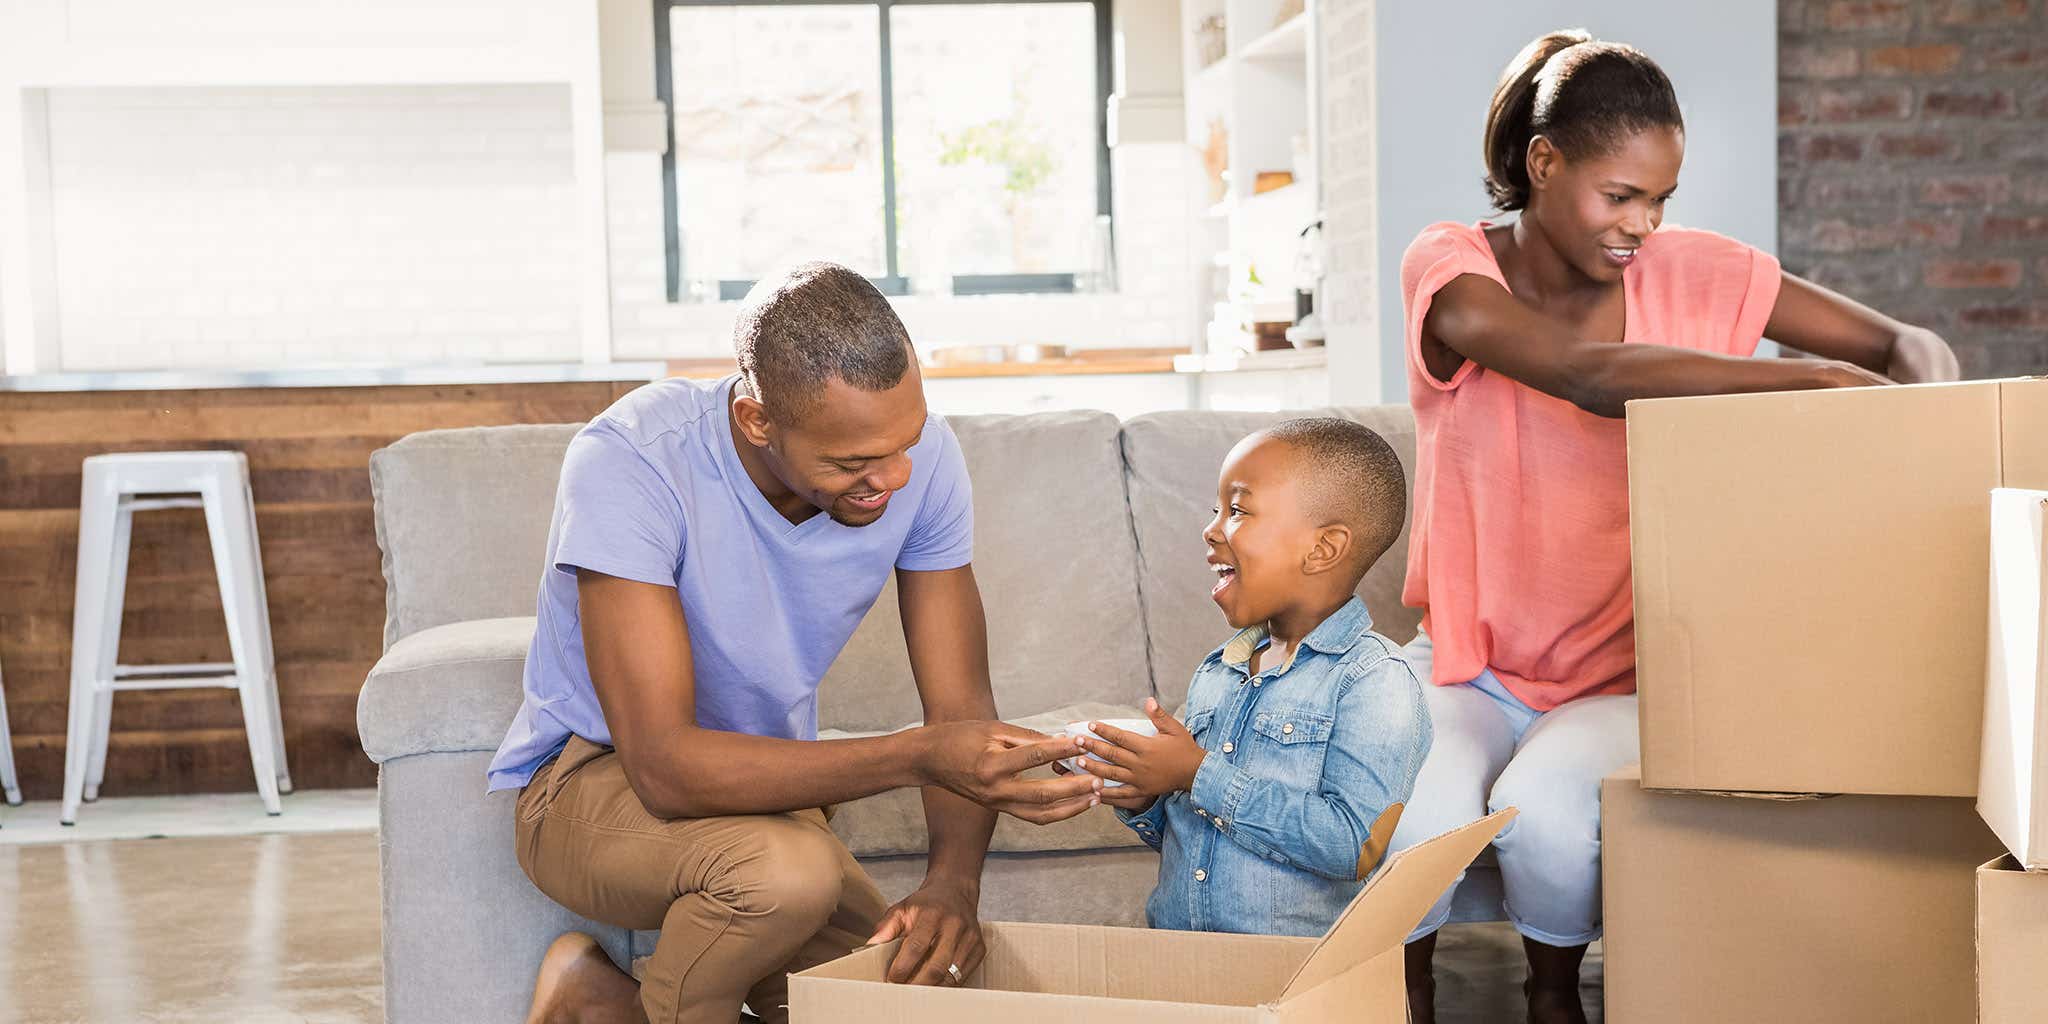 A black family of three, an adult male and female with a young boy are packing boxes to move house. All of them are smiling and there is only a sofa left in the background, with multiple boxes in the foreground of the room